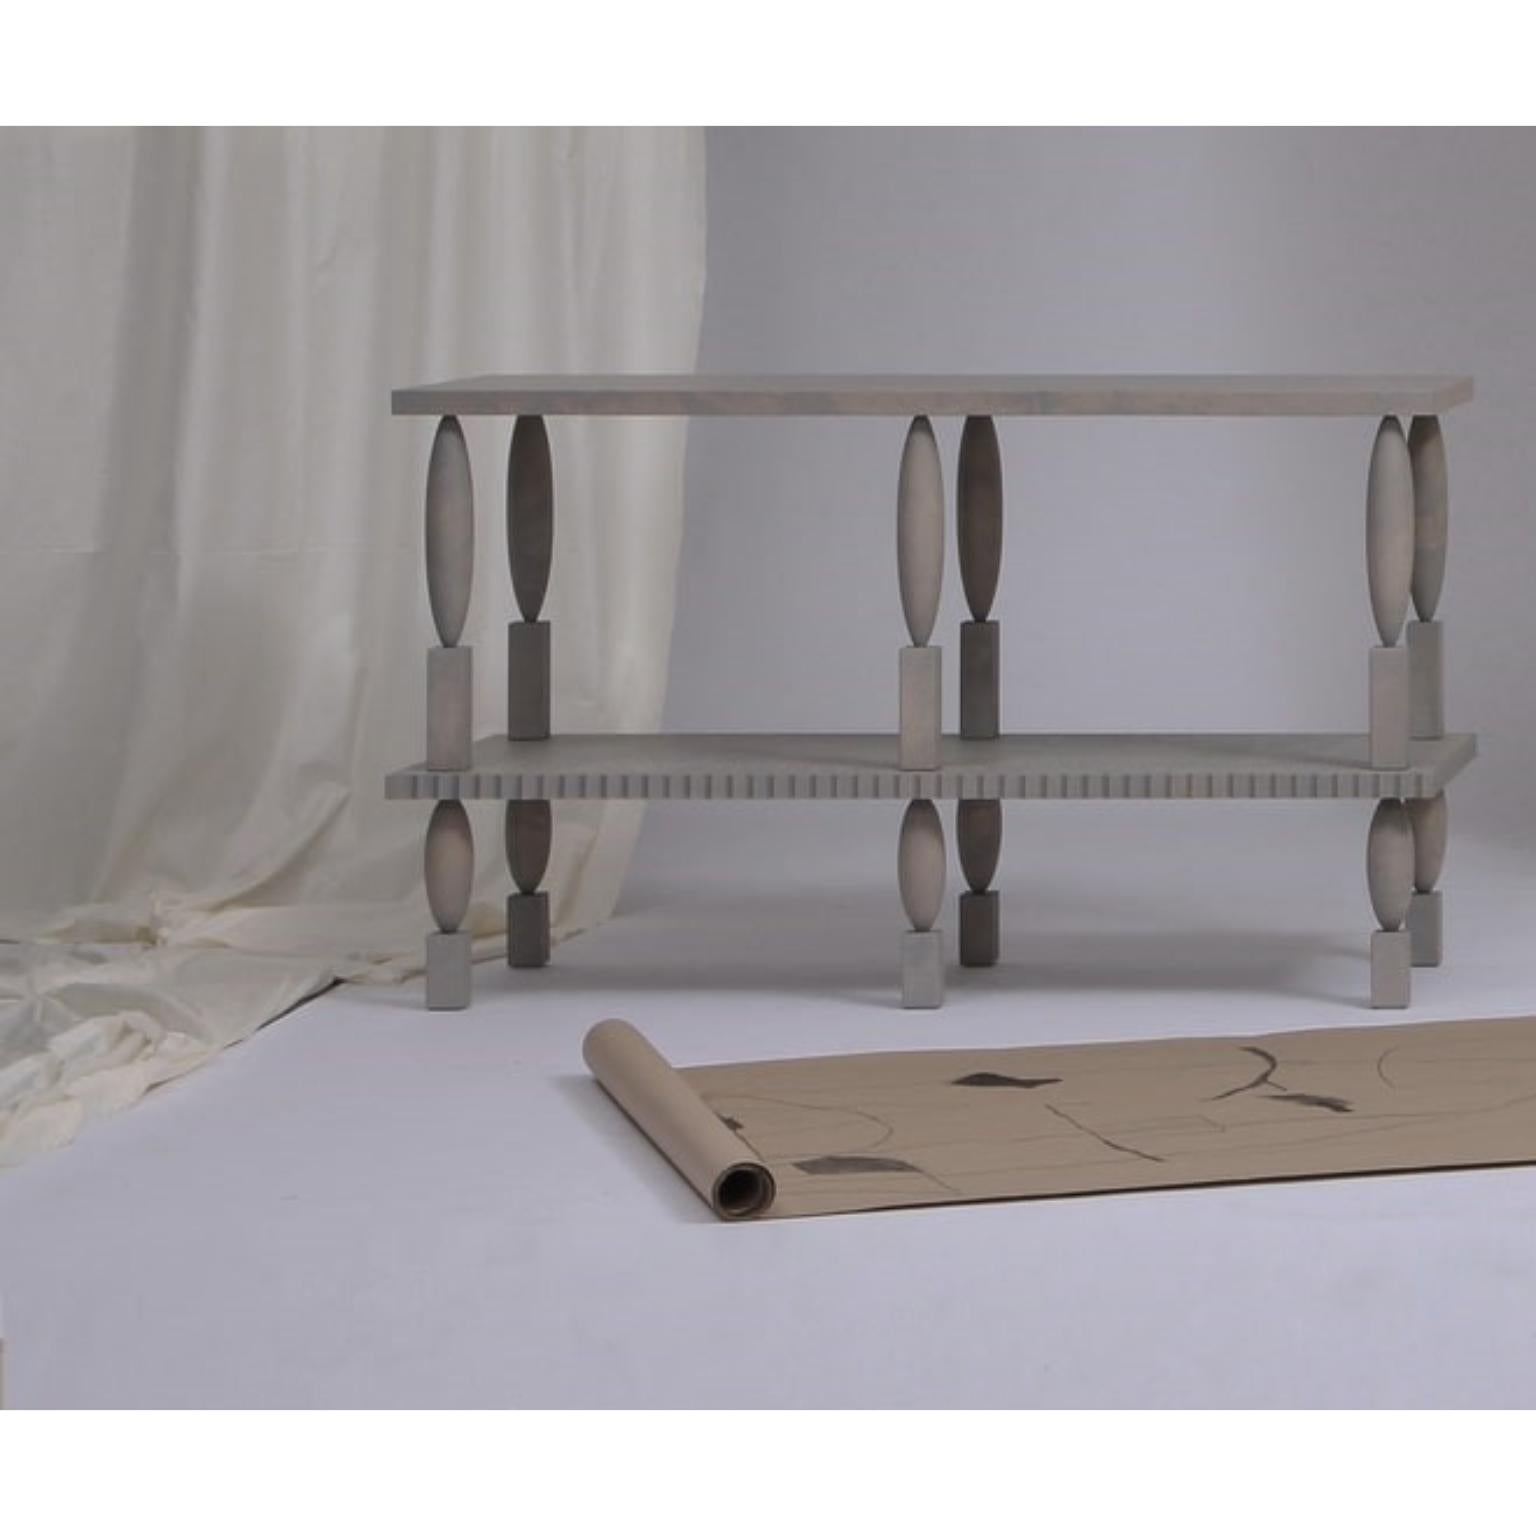 Handmade Nouveau wood shelf by Jirí Krejcirík
Dimensions: 130 x 50 x 77 cm
Material: Birch wood
Also available in other materials and dimensions.

The furniture is inspired by Czech Art Nouveau aesthetics and interdisciplinary artists of that